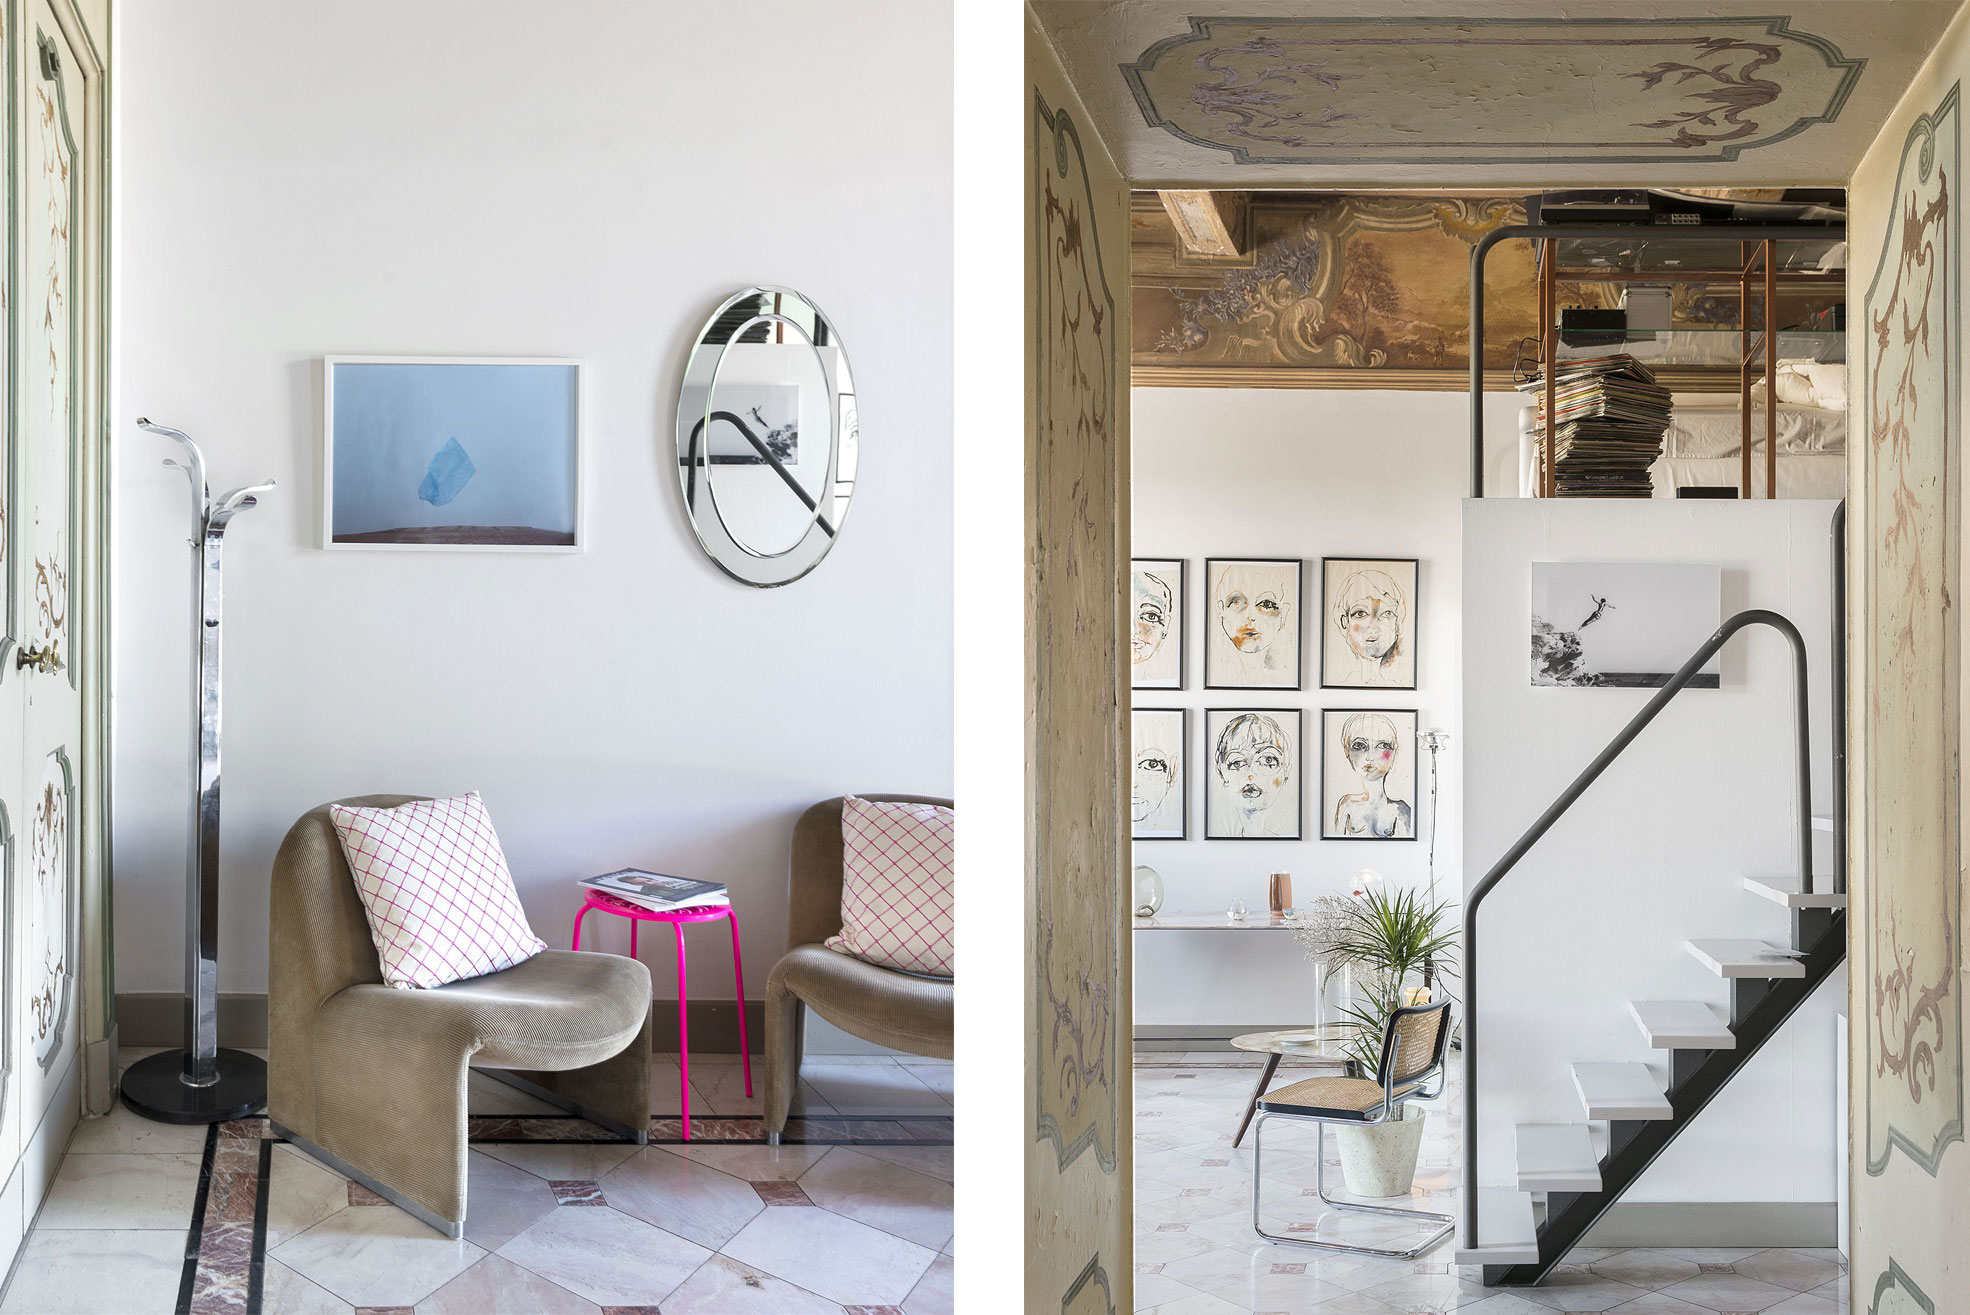 Stairs and artworks in Casa Canvas, a gallery for young designers created